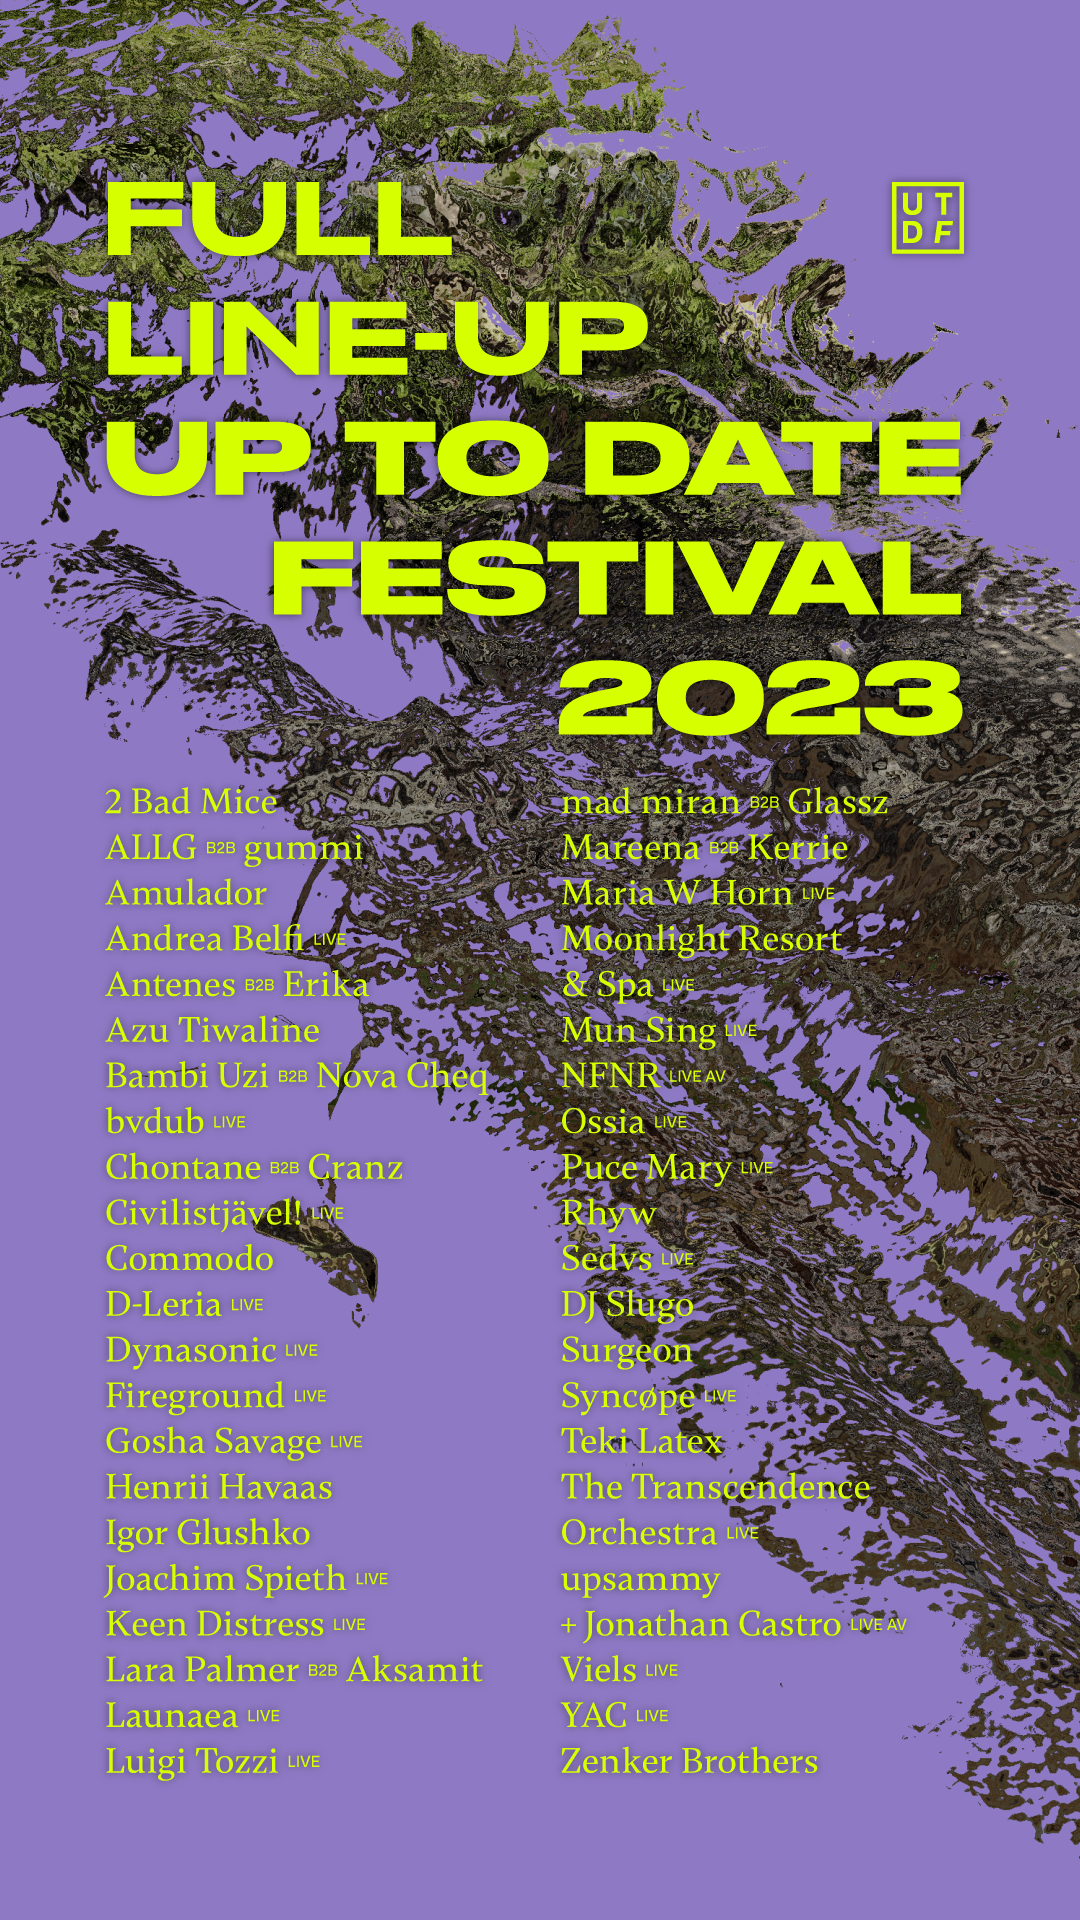 Up To Date Festival 2023 - Página frontal